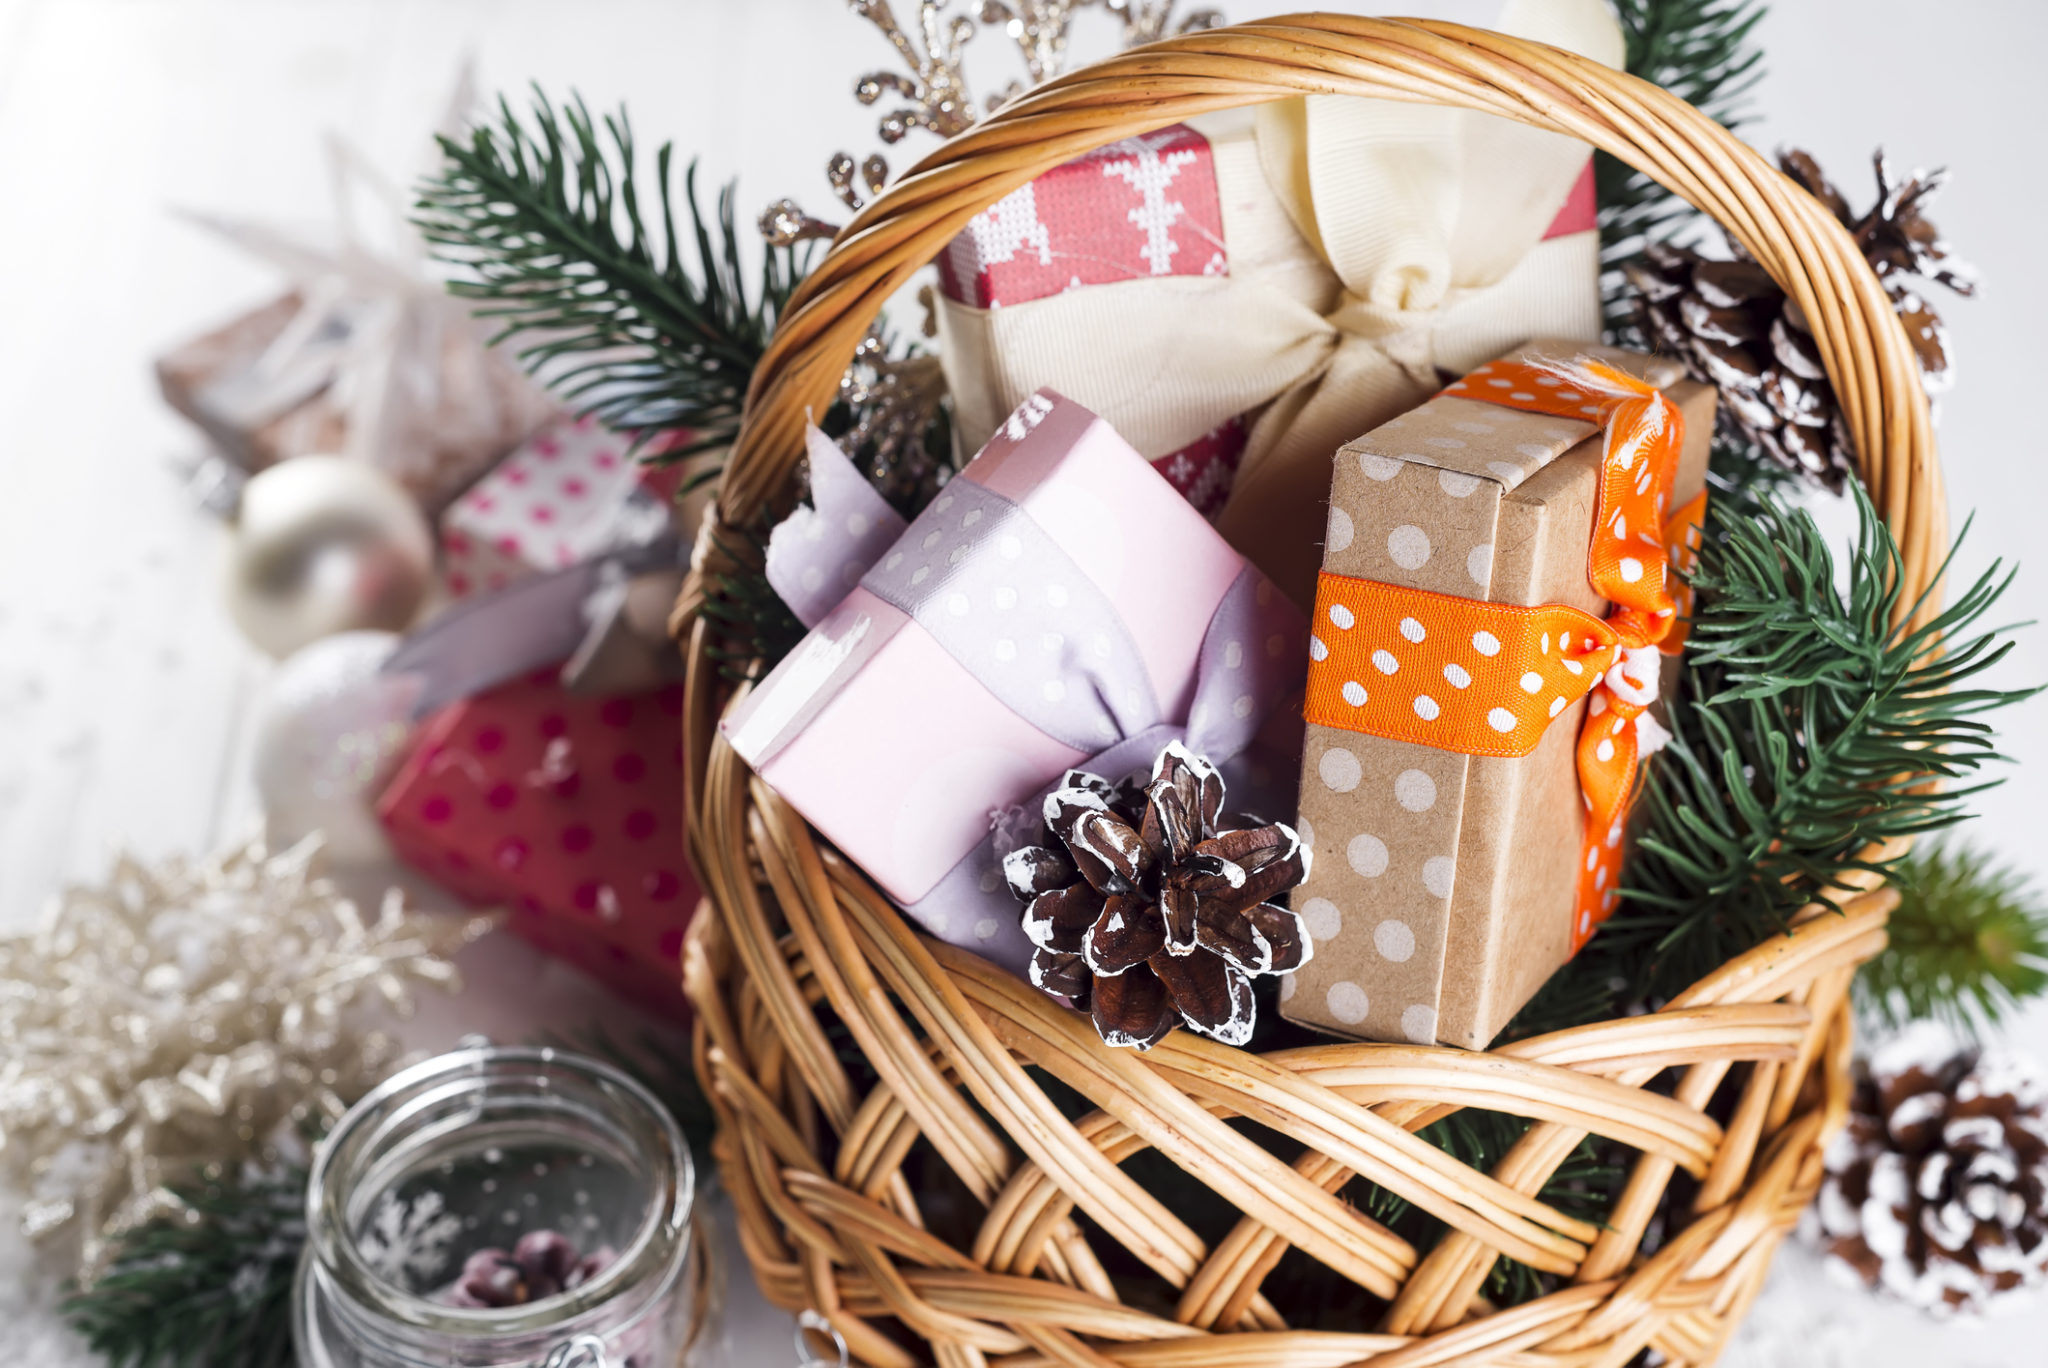 Christmas Gifts in a basket with Candle, balls, pine cones, snowflakes on white Wooden Background.